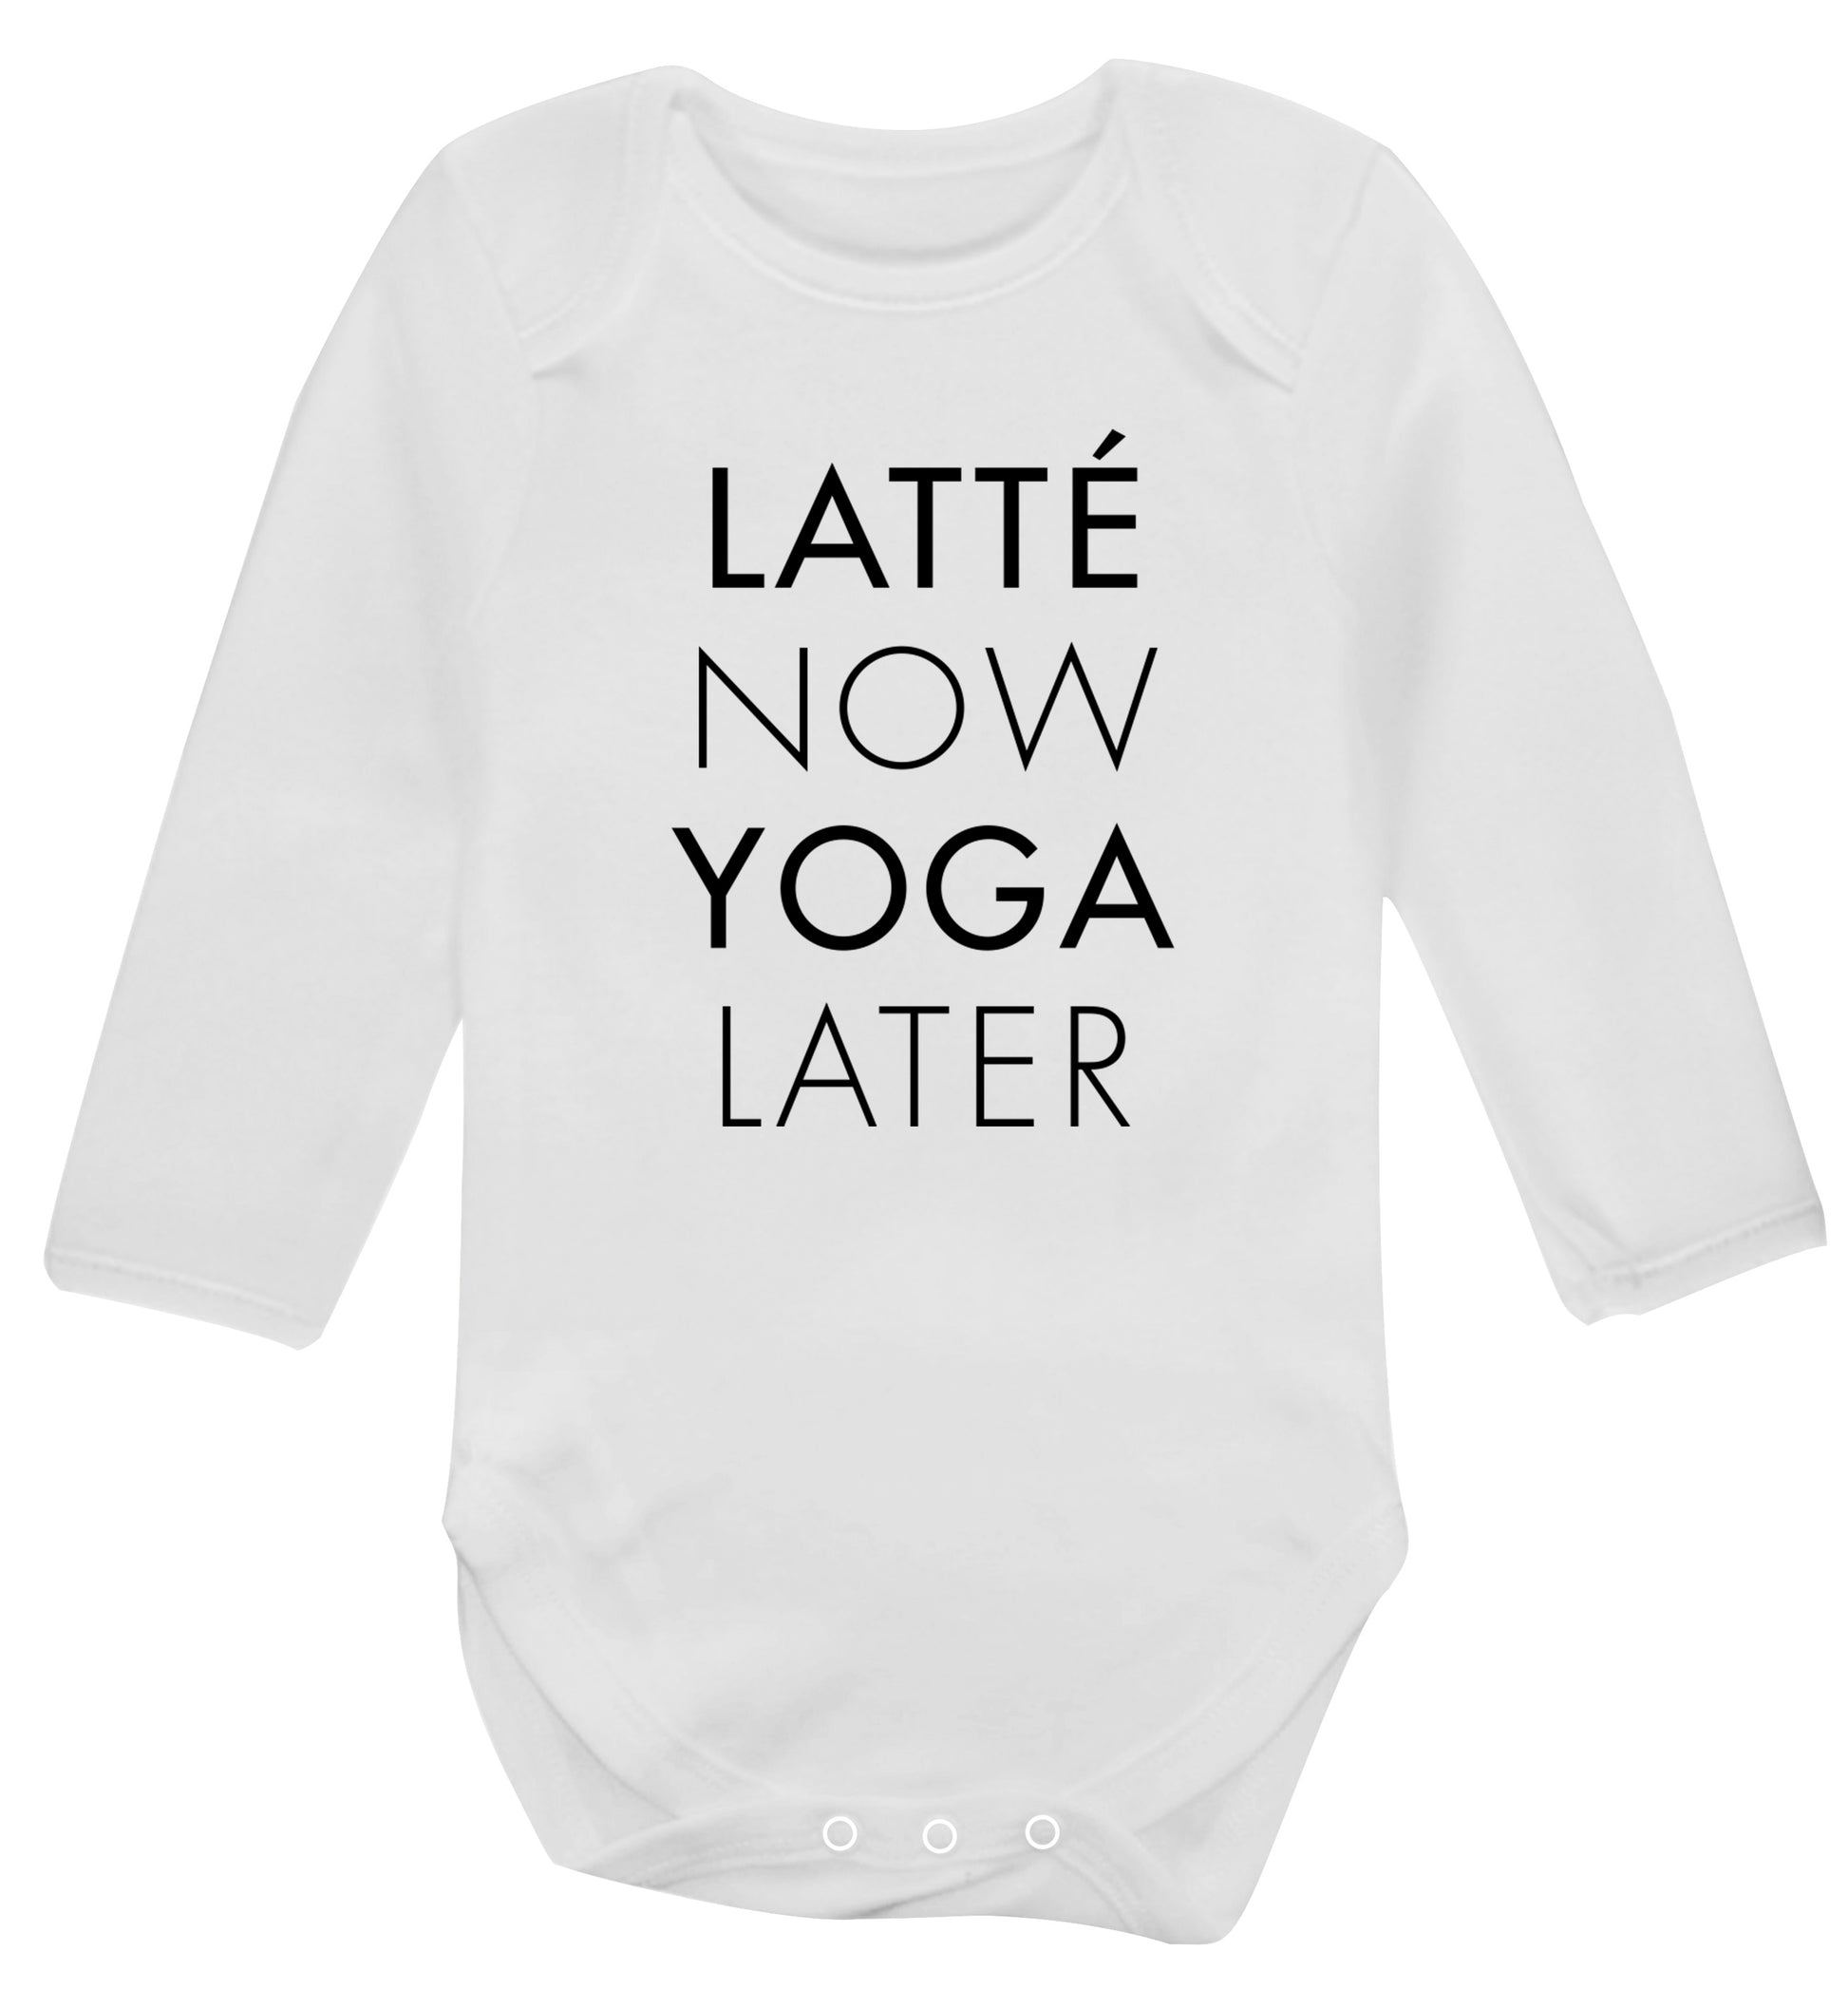 Latte now yoga later Baby Vest long sleeved white 6-12 months